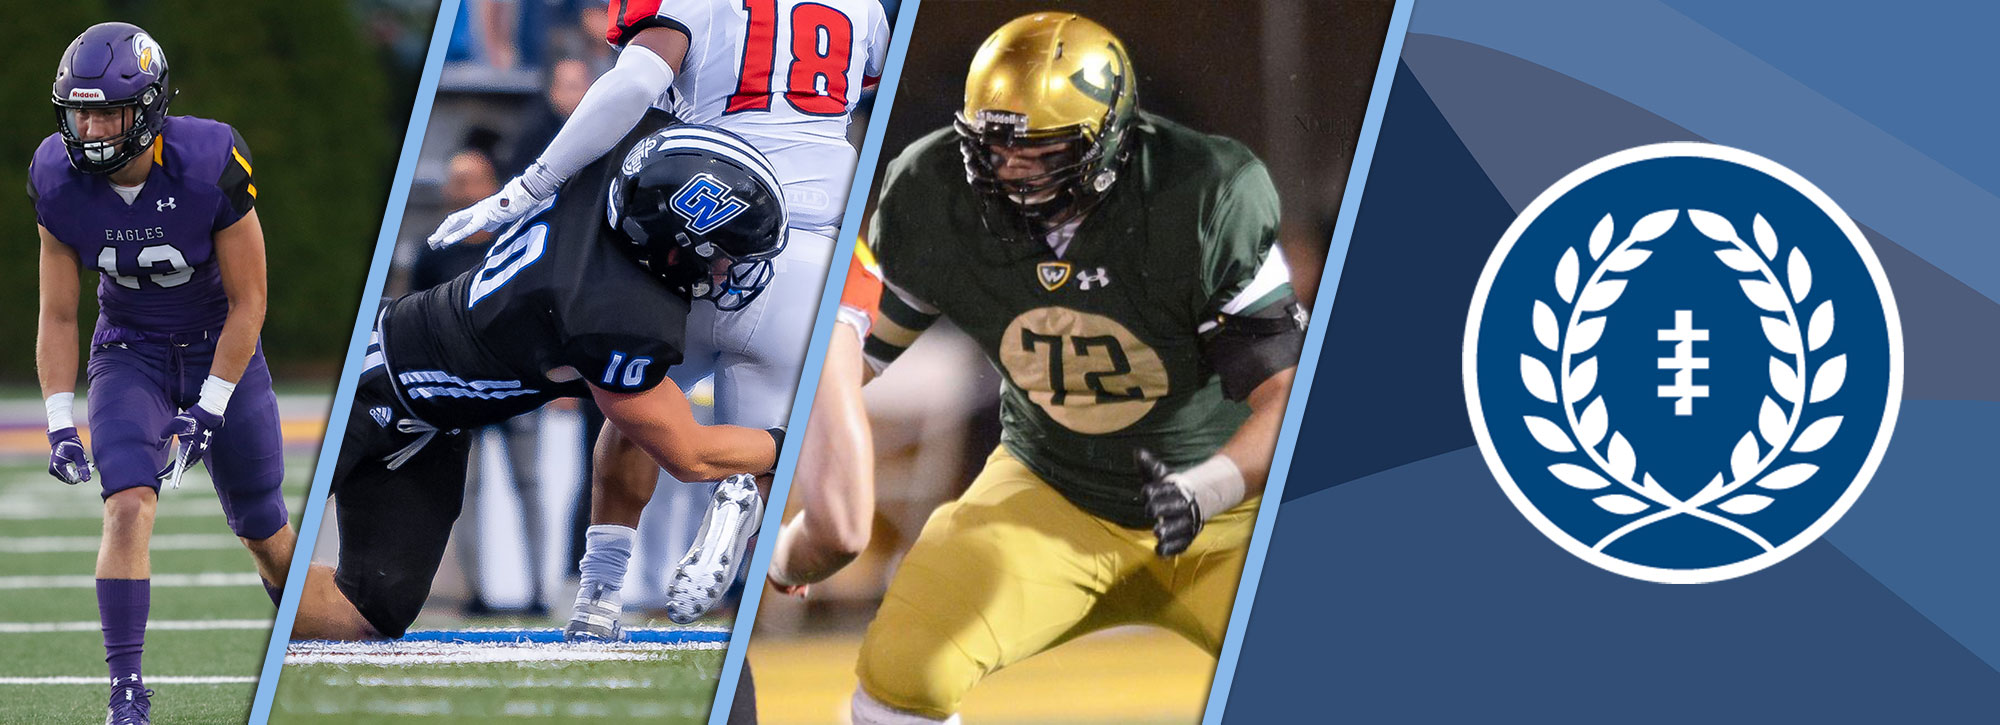 Three GLIAC Student-Athletes Named Semifinalists for 2020 William V. Campbell Trophy® Presented by Mazda